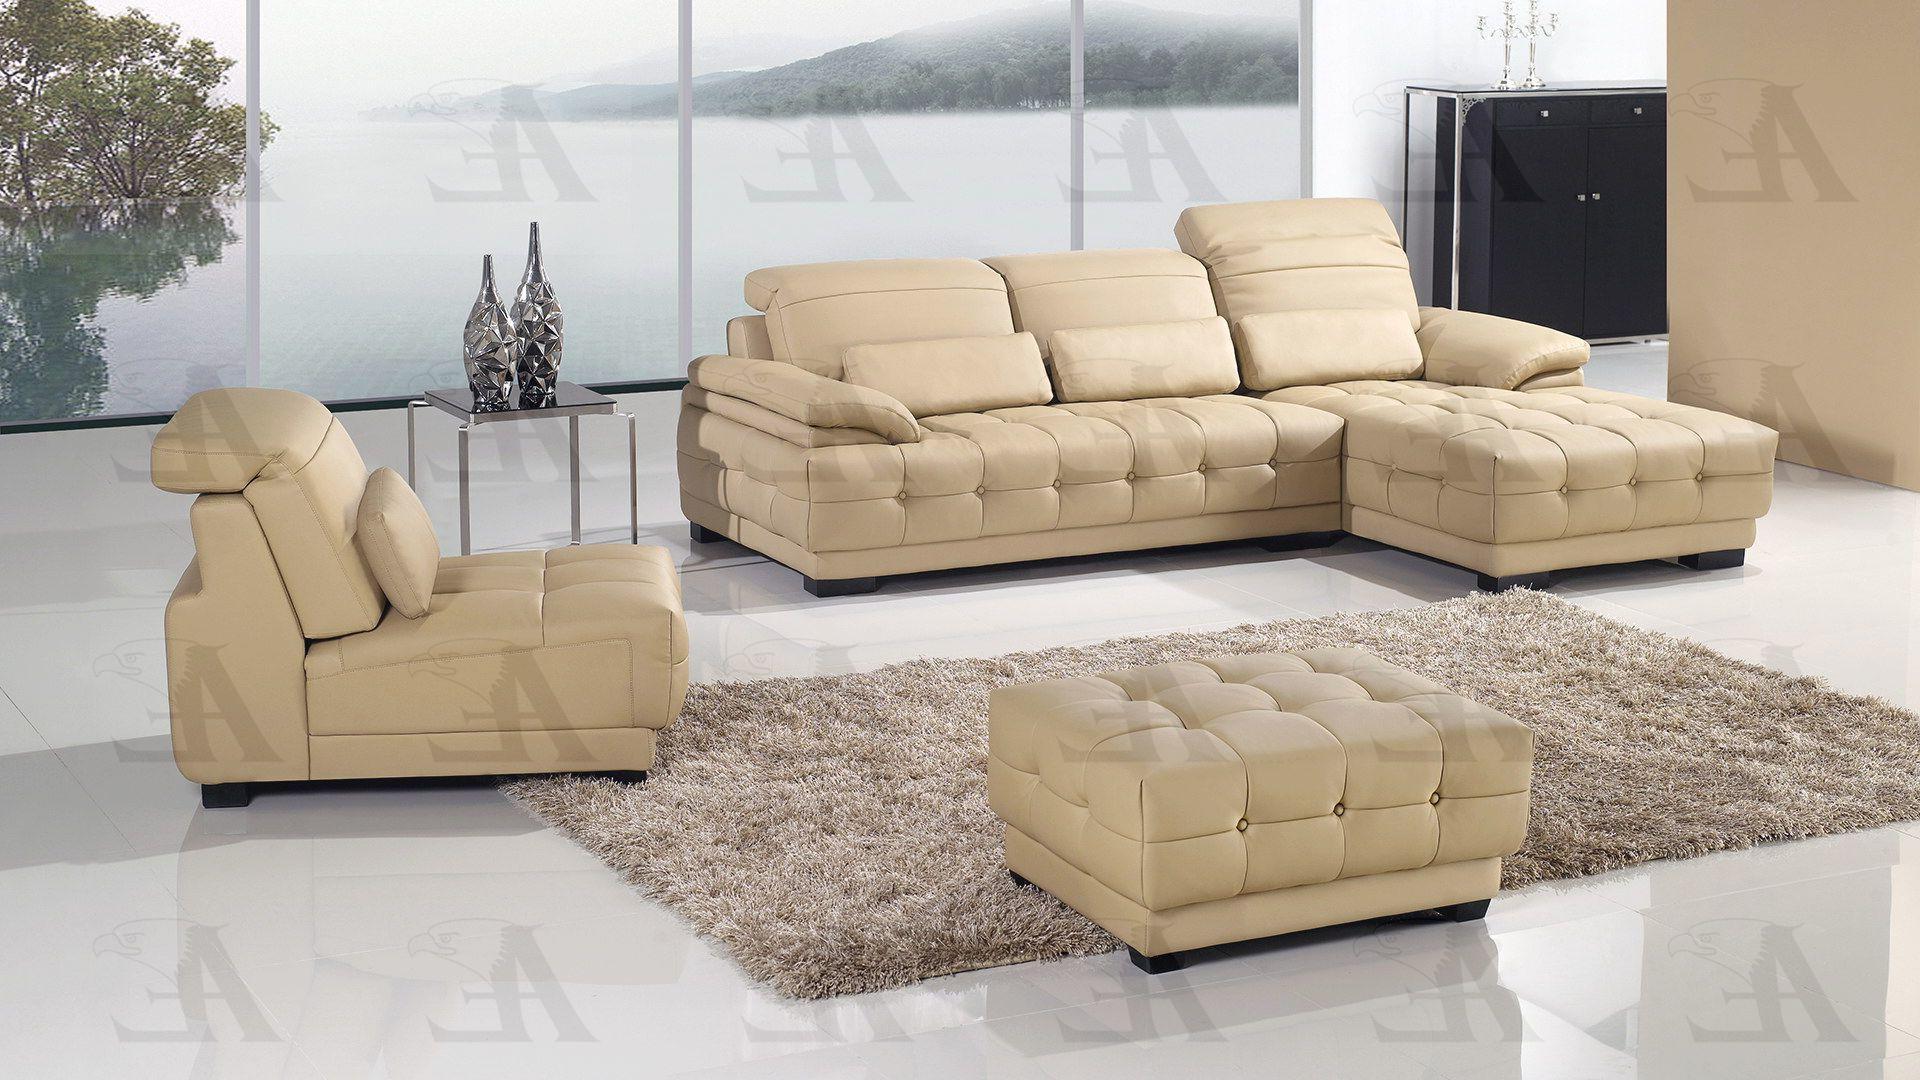 

    
American Eagle Furniture AE-L296-CA Camel Sofa Chaise Chair and Ottoman Set Right Hand Chase Bonded Leather 4Pcs
